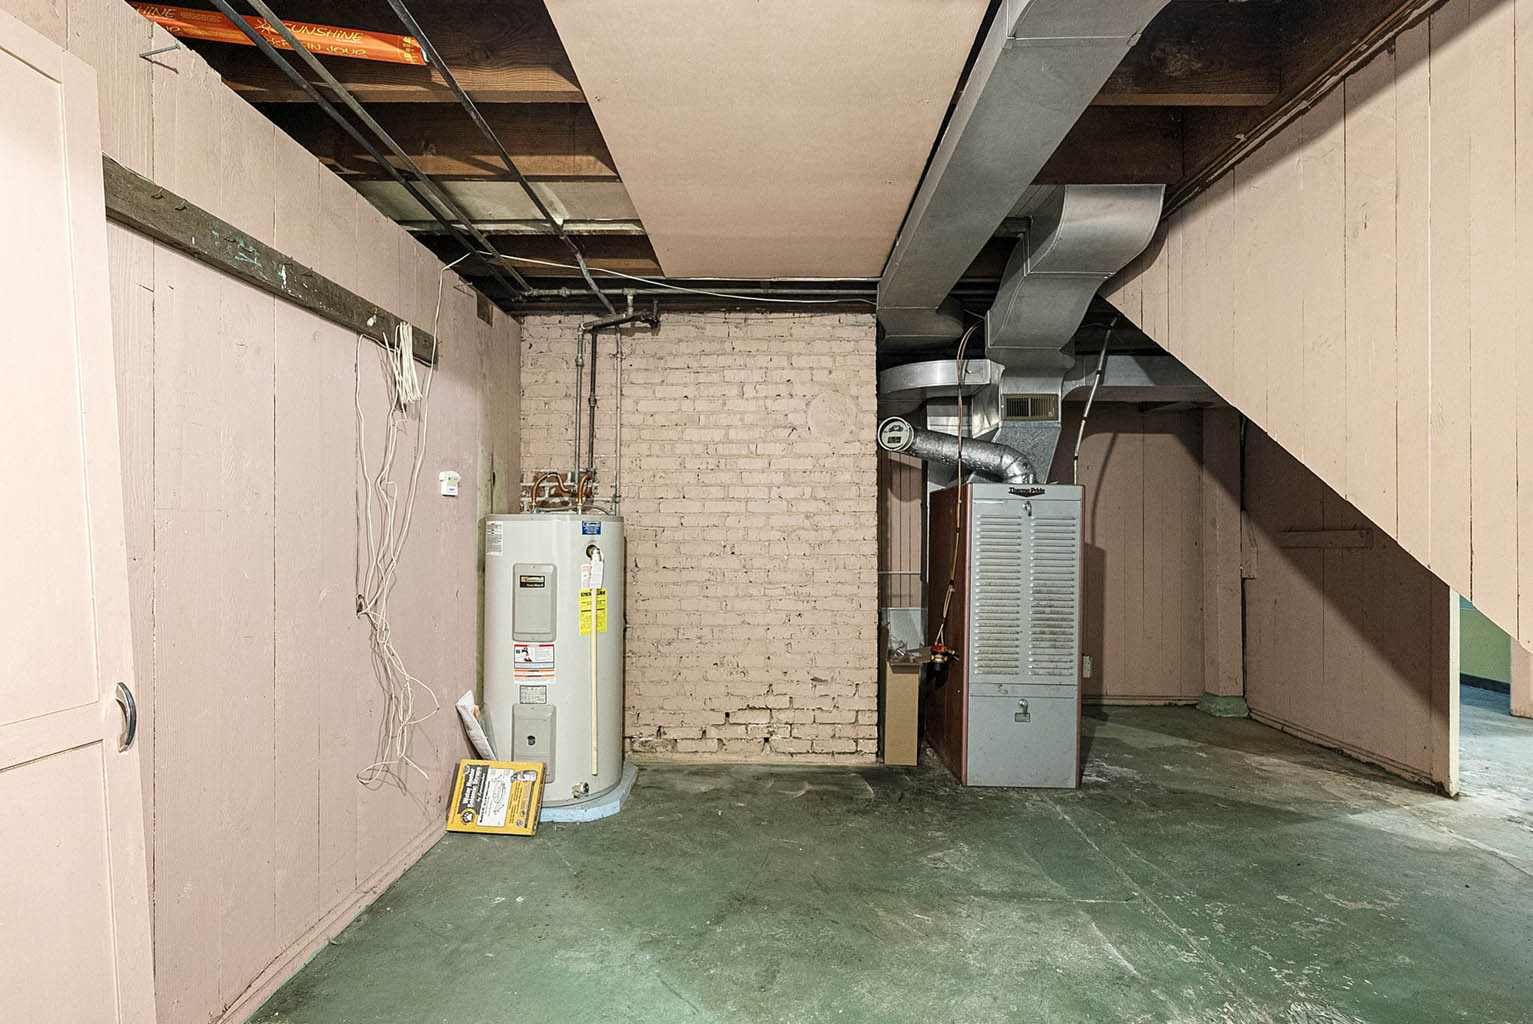 Electric water heater and oil furnace